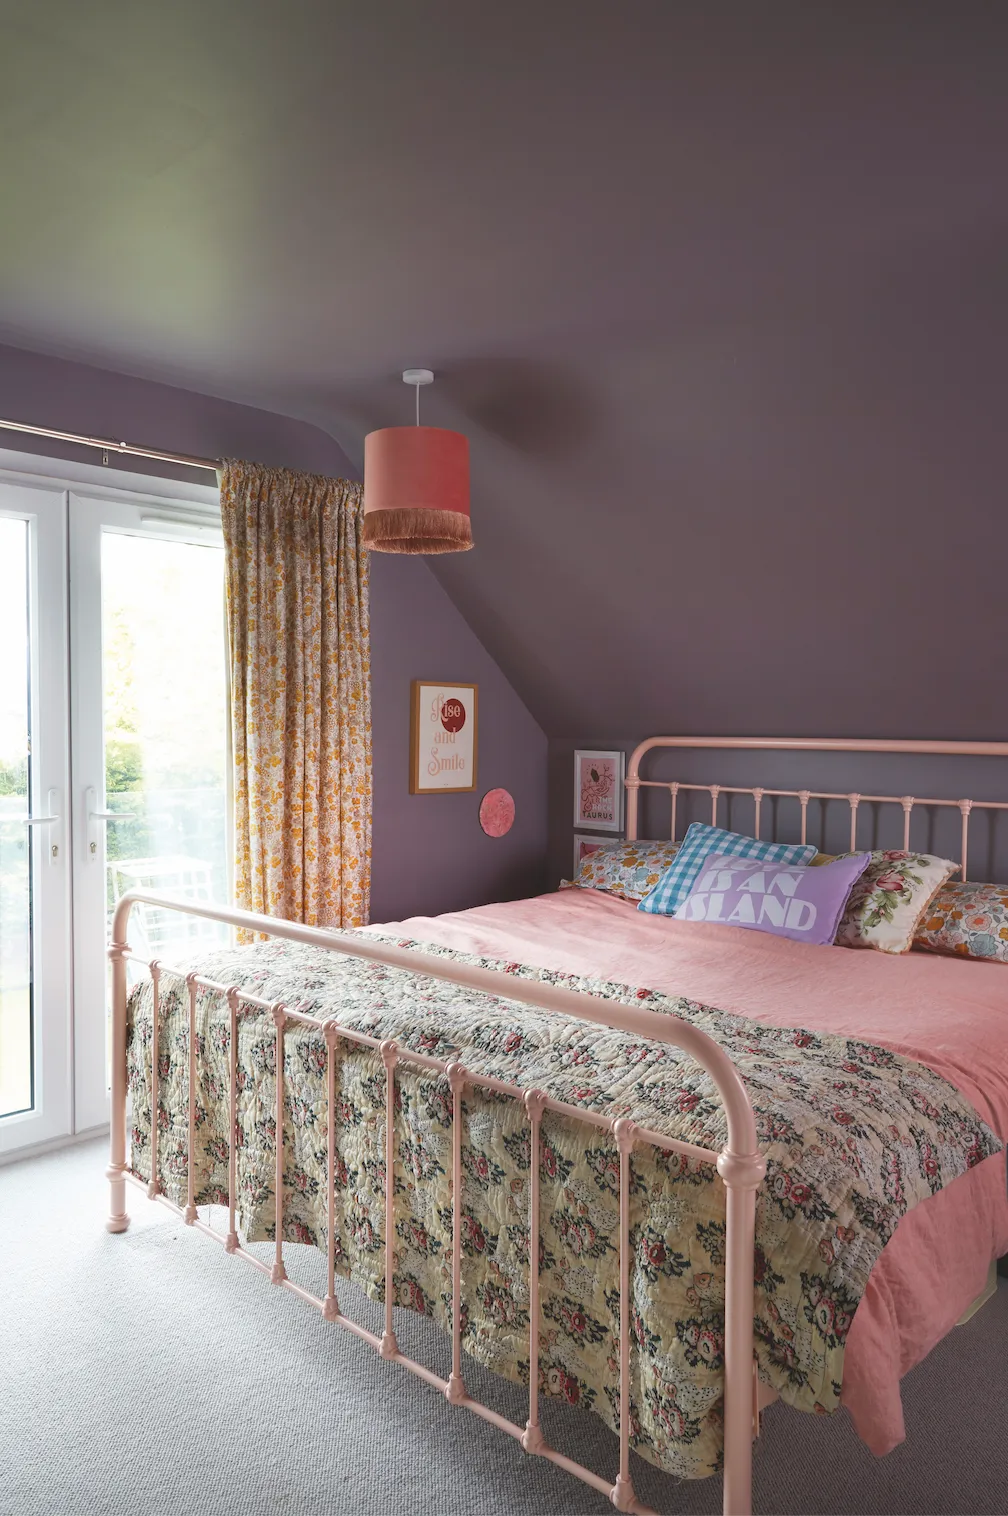 The couple redecorated their bedroom with walls in Farrow & Ball’s Calluna and a pink bed from Feather & Black. ‘I intend to put more pictures up, but I’m enjoying the calming lilac colour,’ Jess says